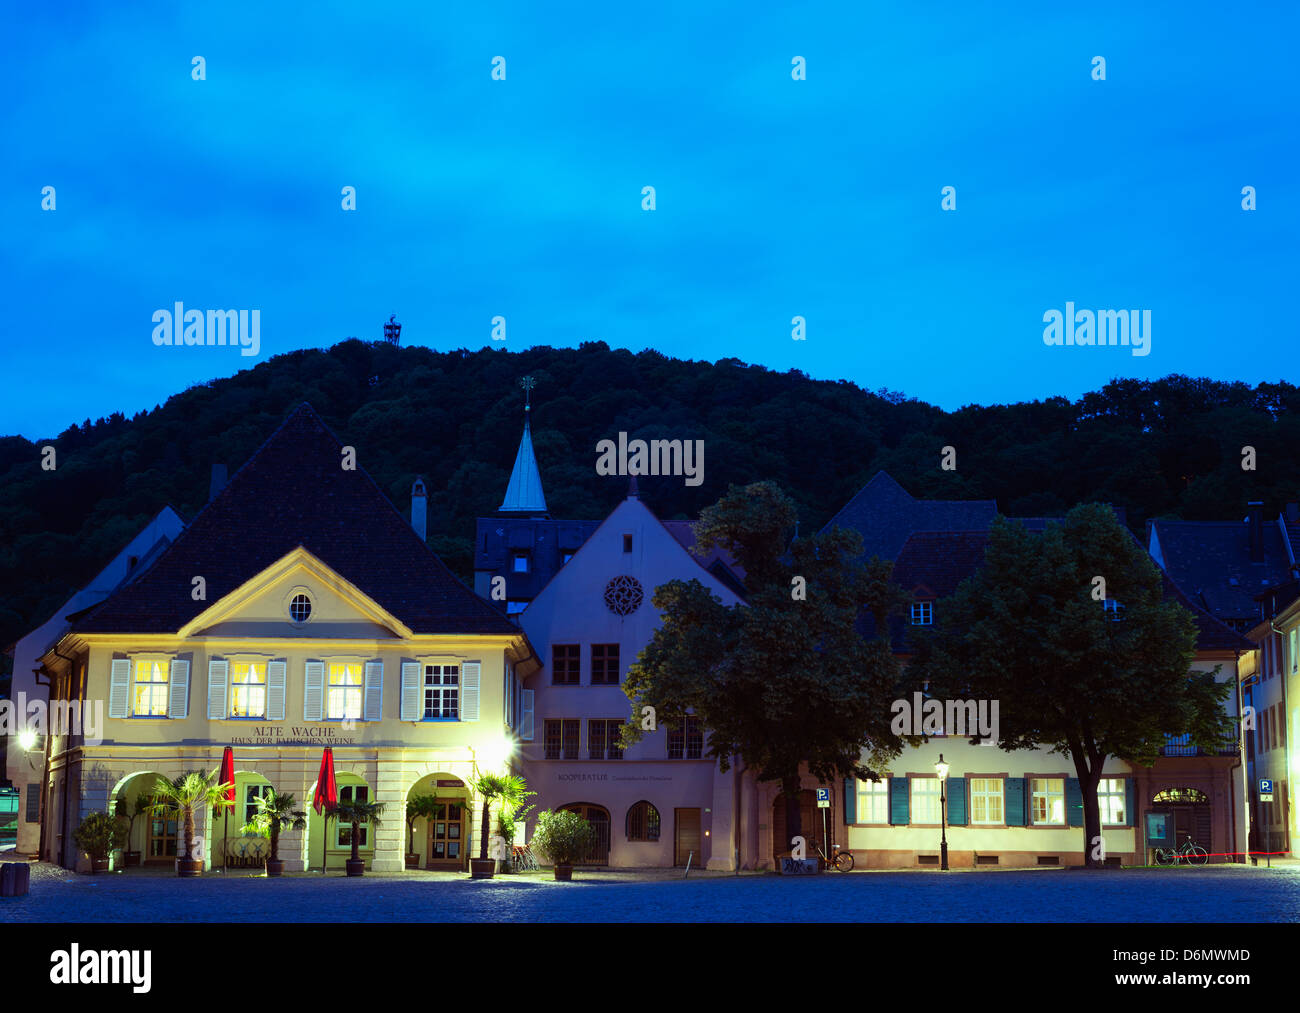 The Alte Wache old guardhouse, Freiburg, Baden-Wurttemberg, Germany, Europe Stock Photo